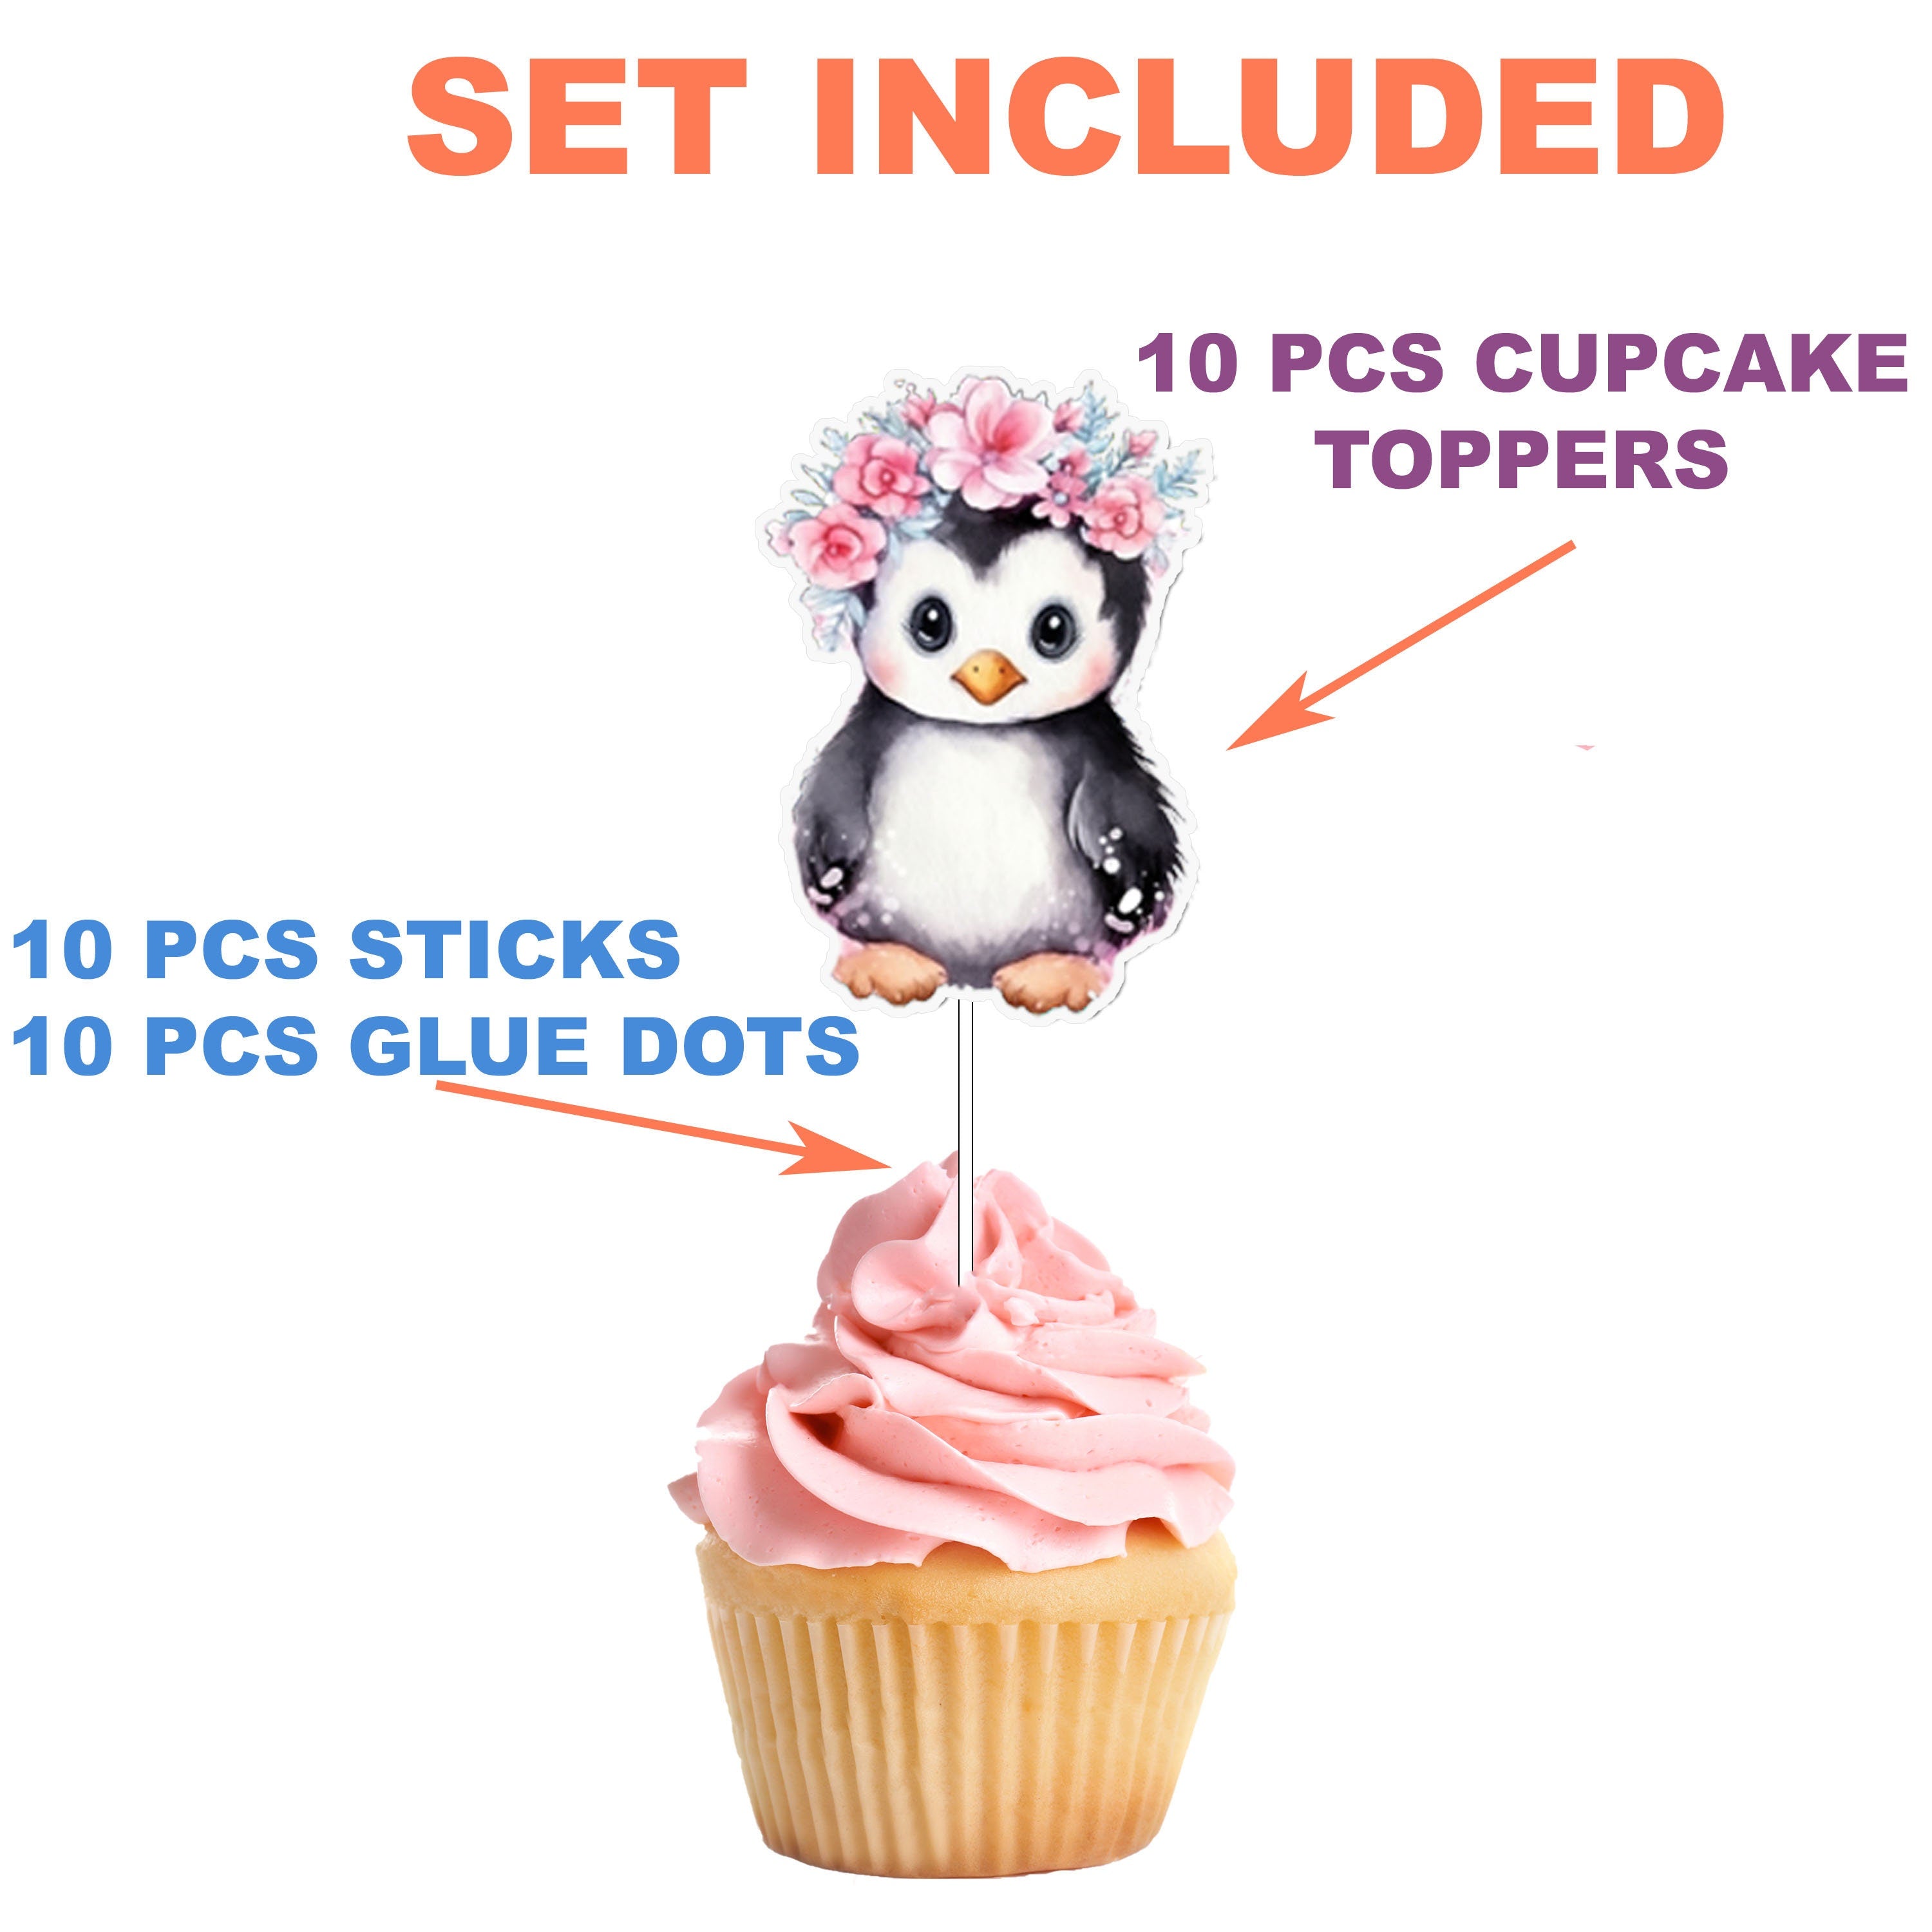 Adorable Penguin Cupcake Toppers - A Charming Addition to Your Sweet Celebrations